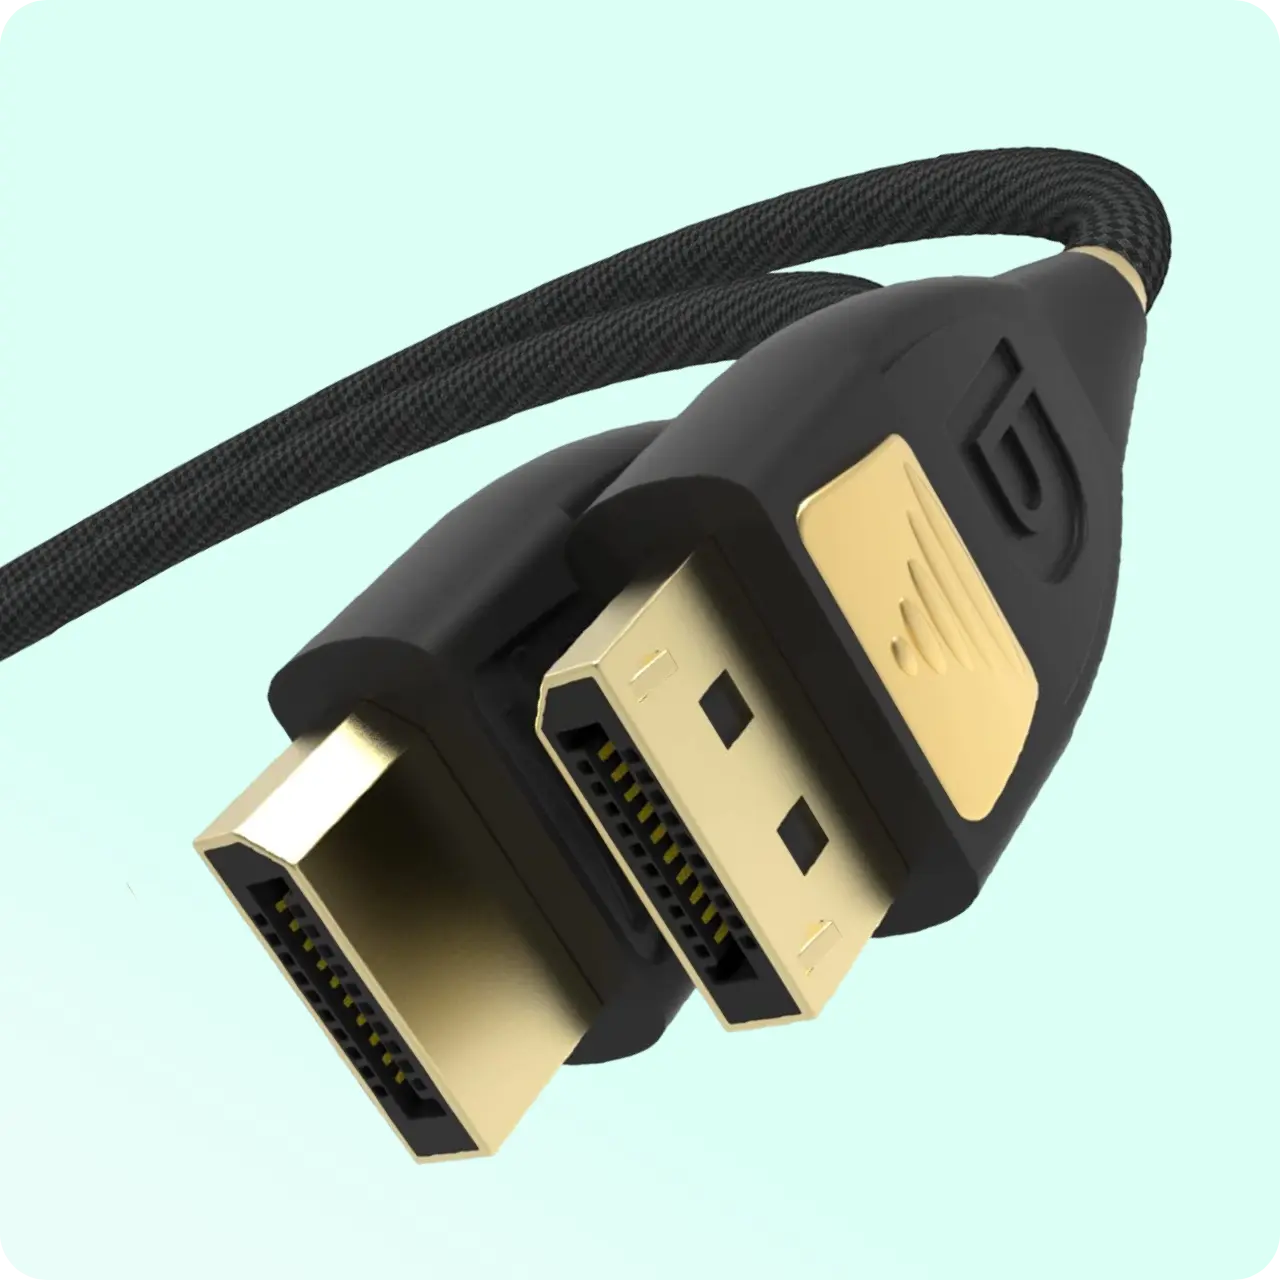 Standard Series DisplayPort to HDMI High Speed Cable 10ft